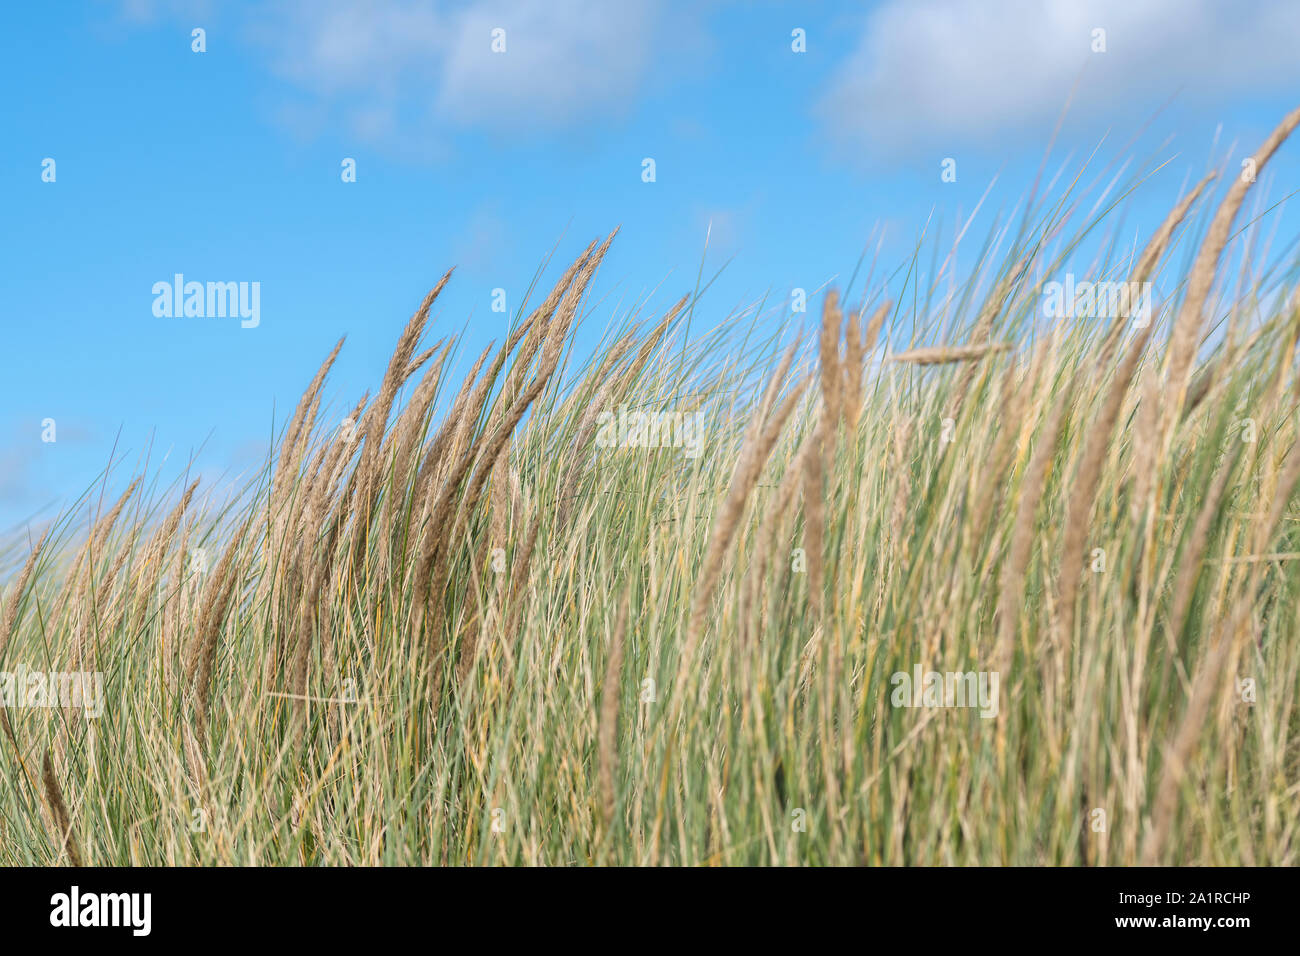 Seeding tufts of the coastal plant Marram Grass / Ammophila arenaria against blue sky with puffy clouds. Marram used to stabilise sand dune systems. Stock Photo